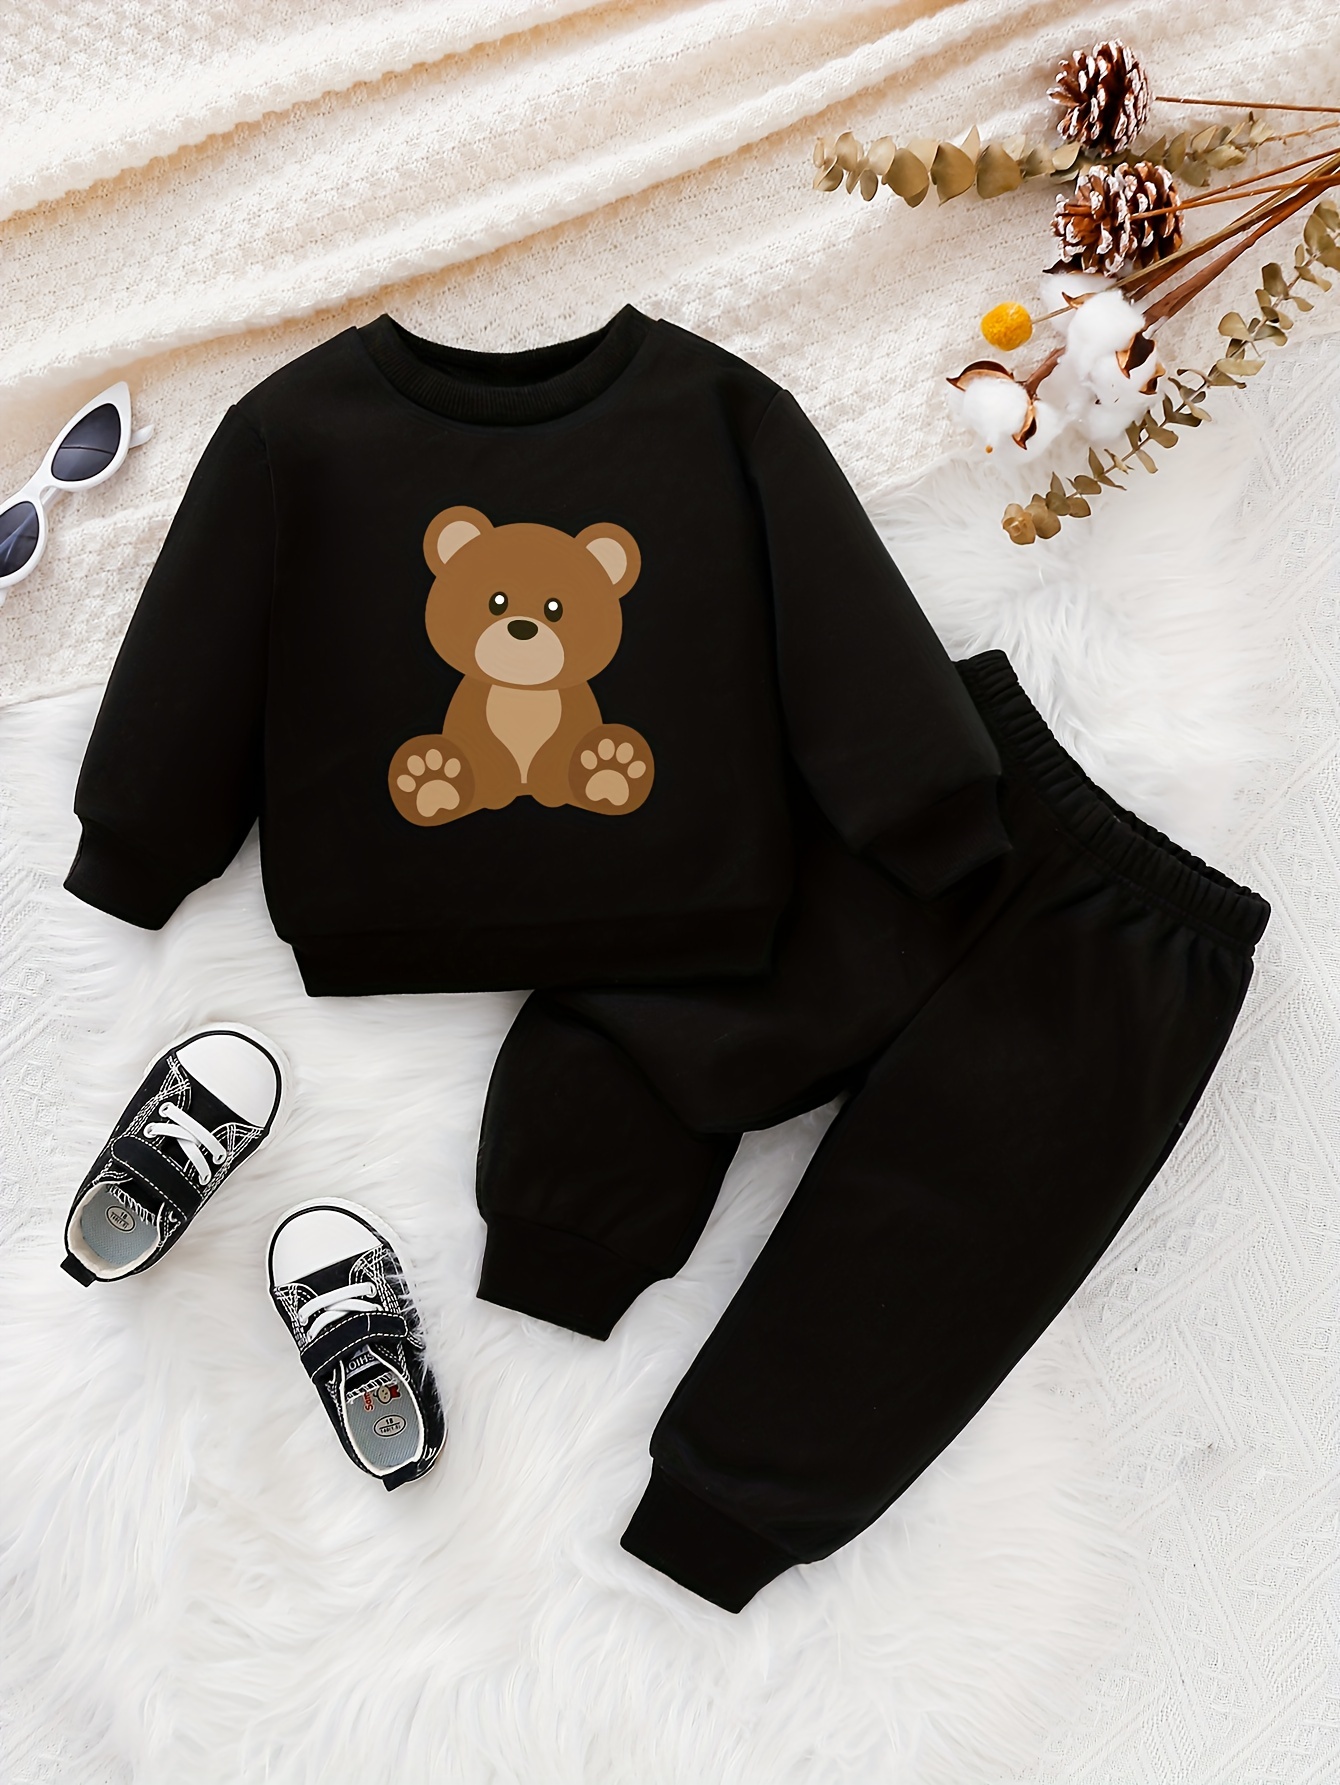  Toddler Baby Boys Girls Crewneck Pullover Thicked